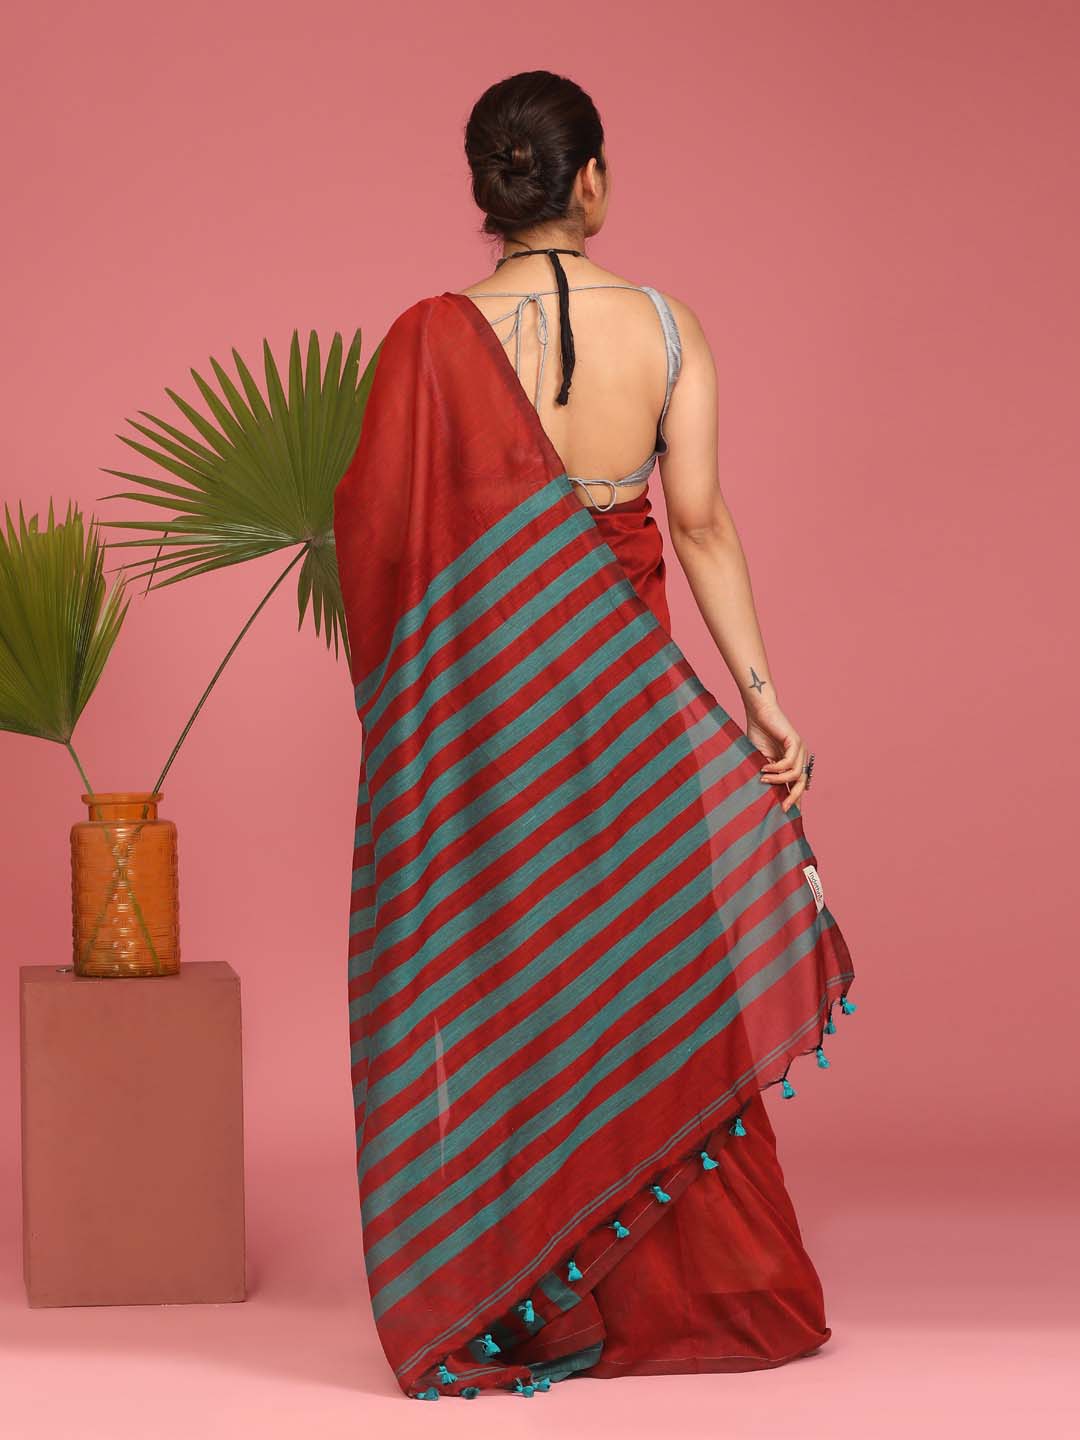 Indethnic Maroon Saree with Green Striped Pleats and Pallu - View 3